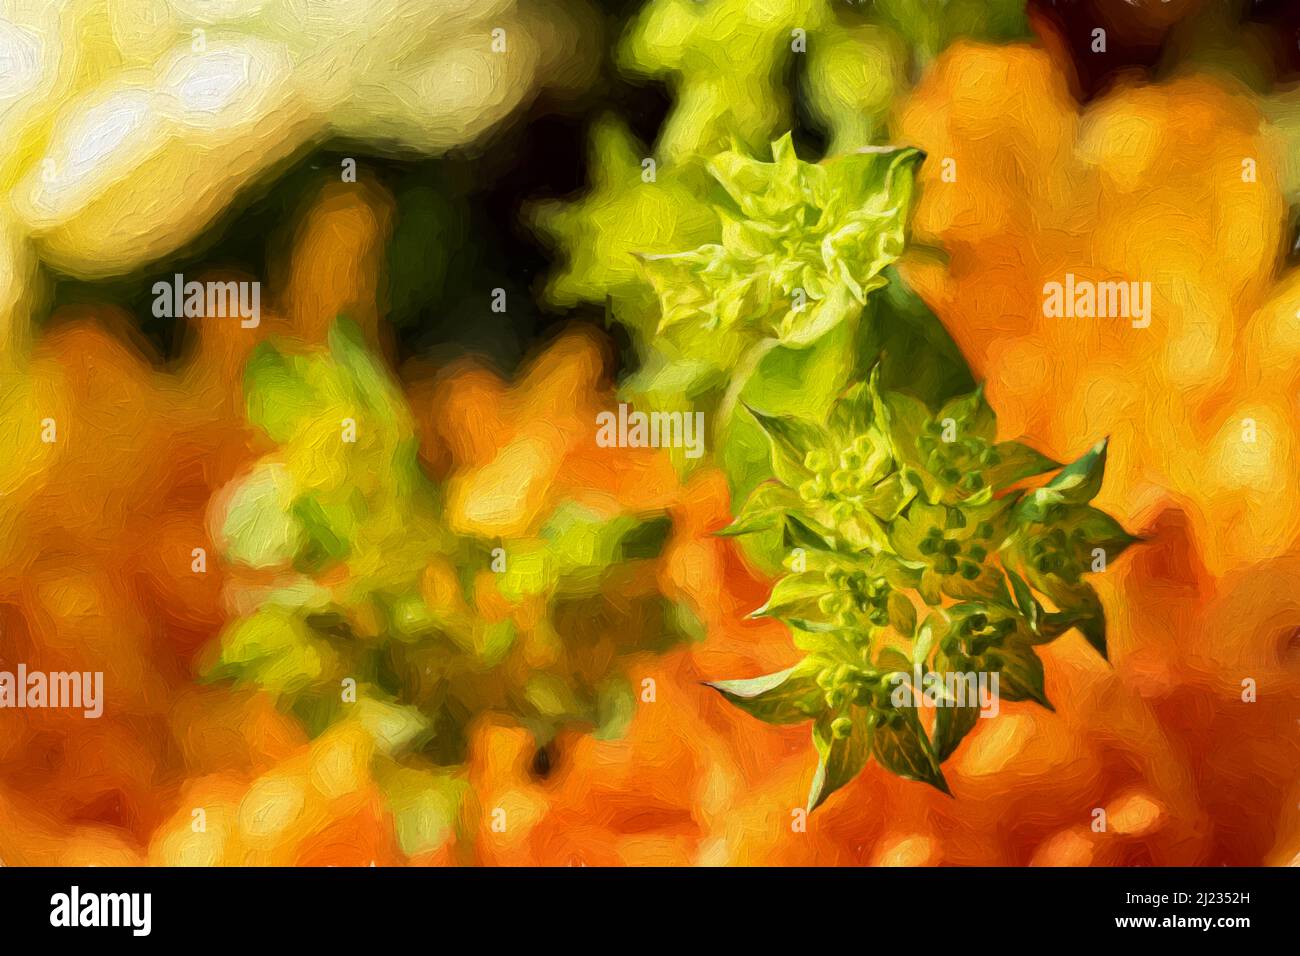 Digital painting of a sprig of spurge in a natural garden setting with shallow depth of field. Stock Photo